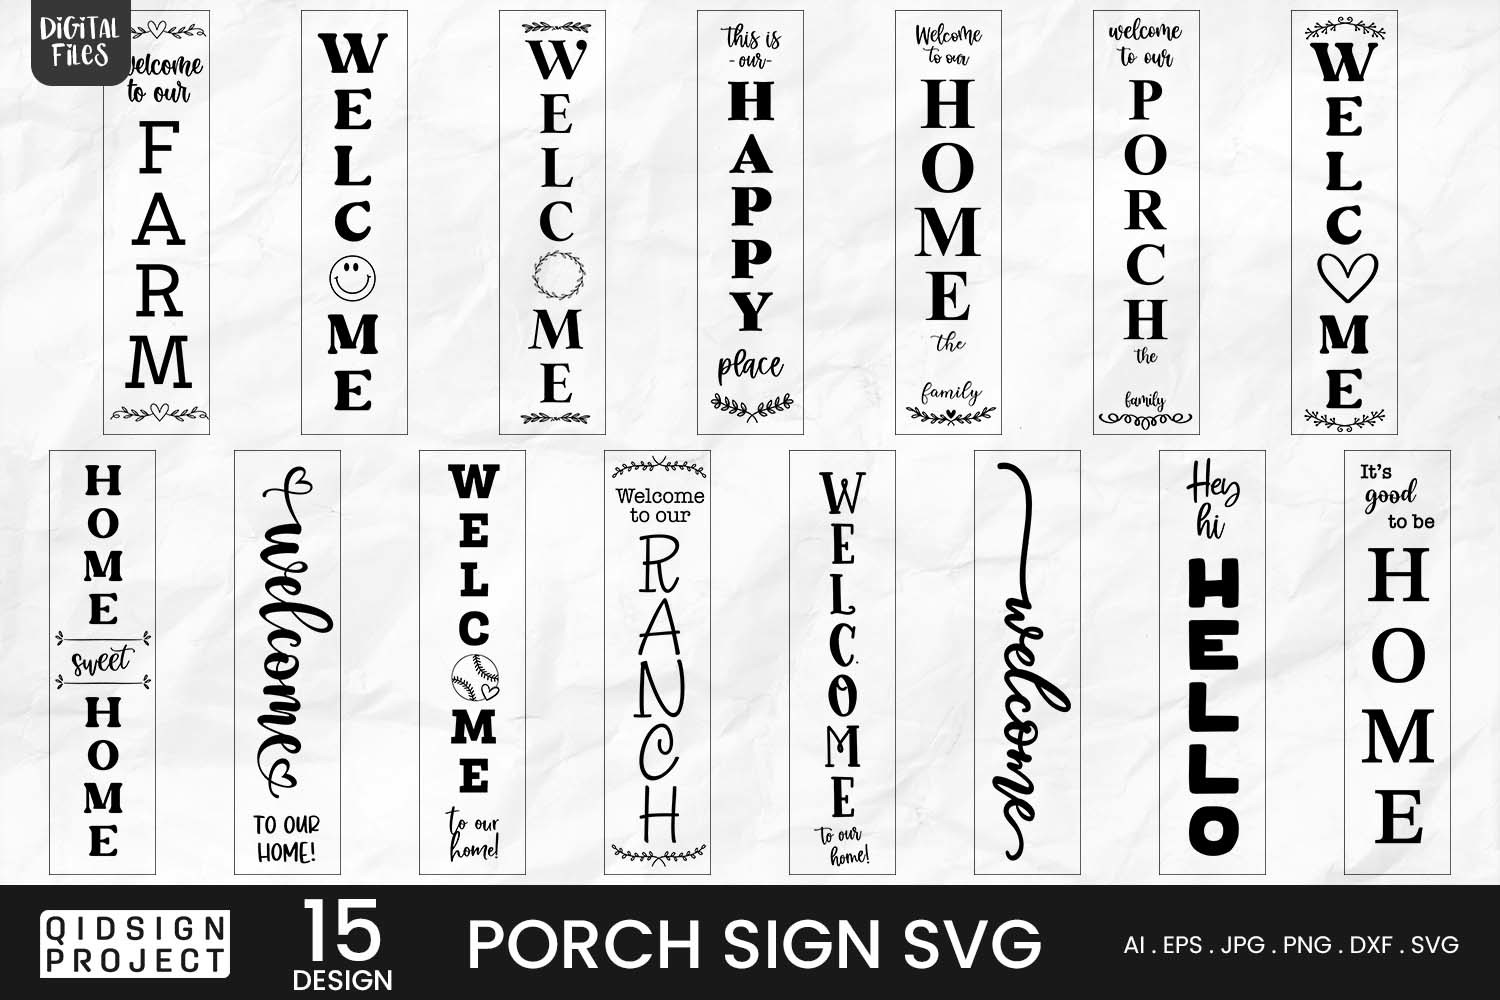 Porch Sign SVG Bundle | 15 Variations Graphic by qidsign project ...